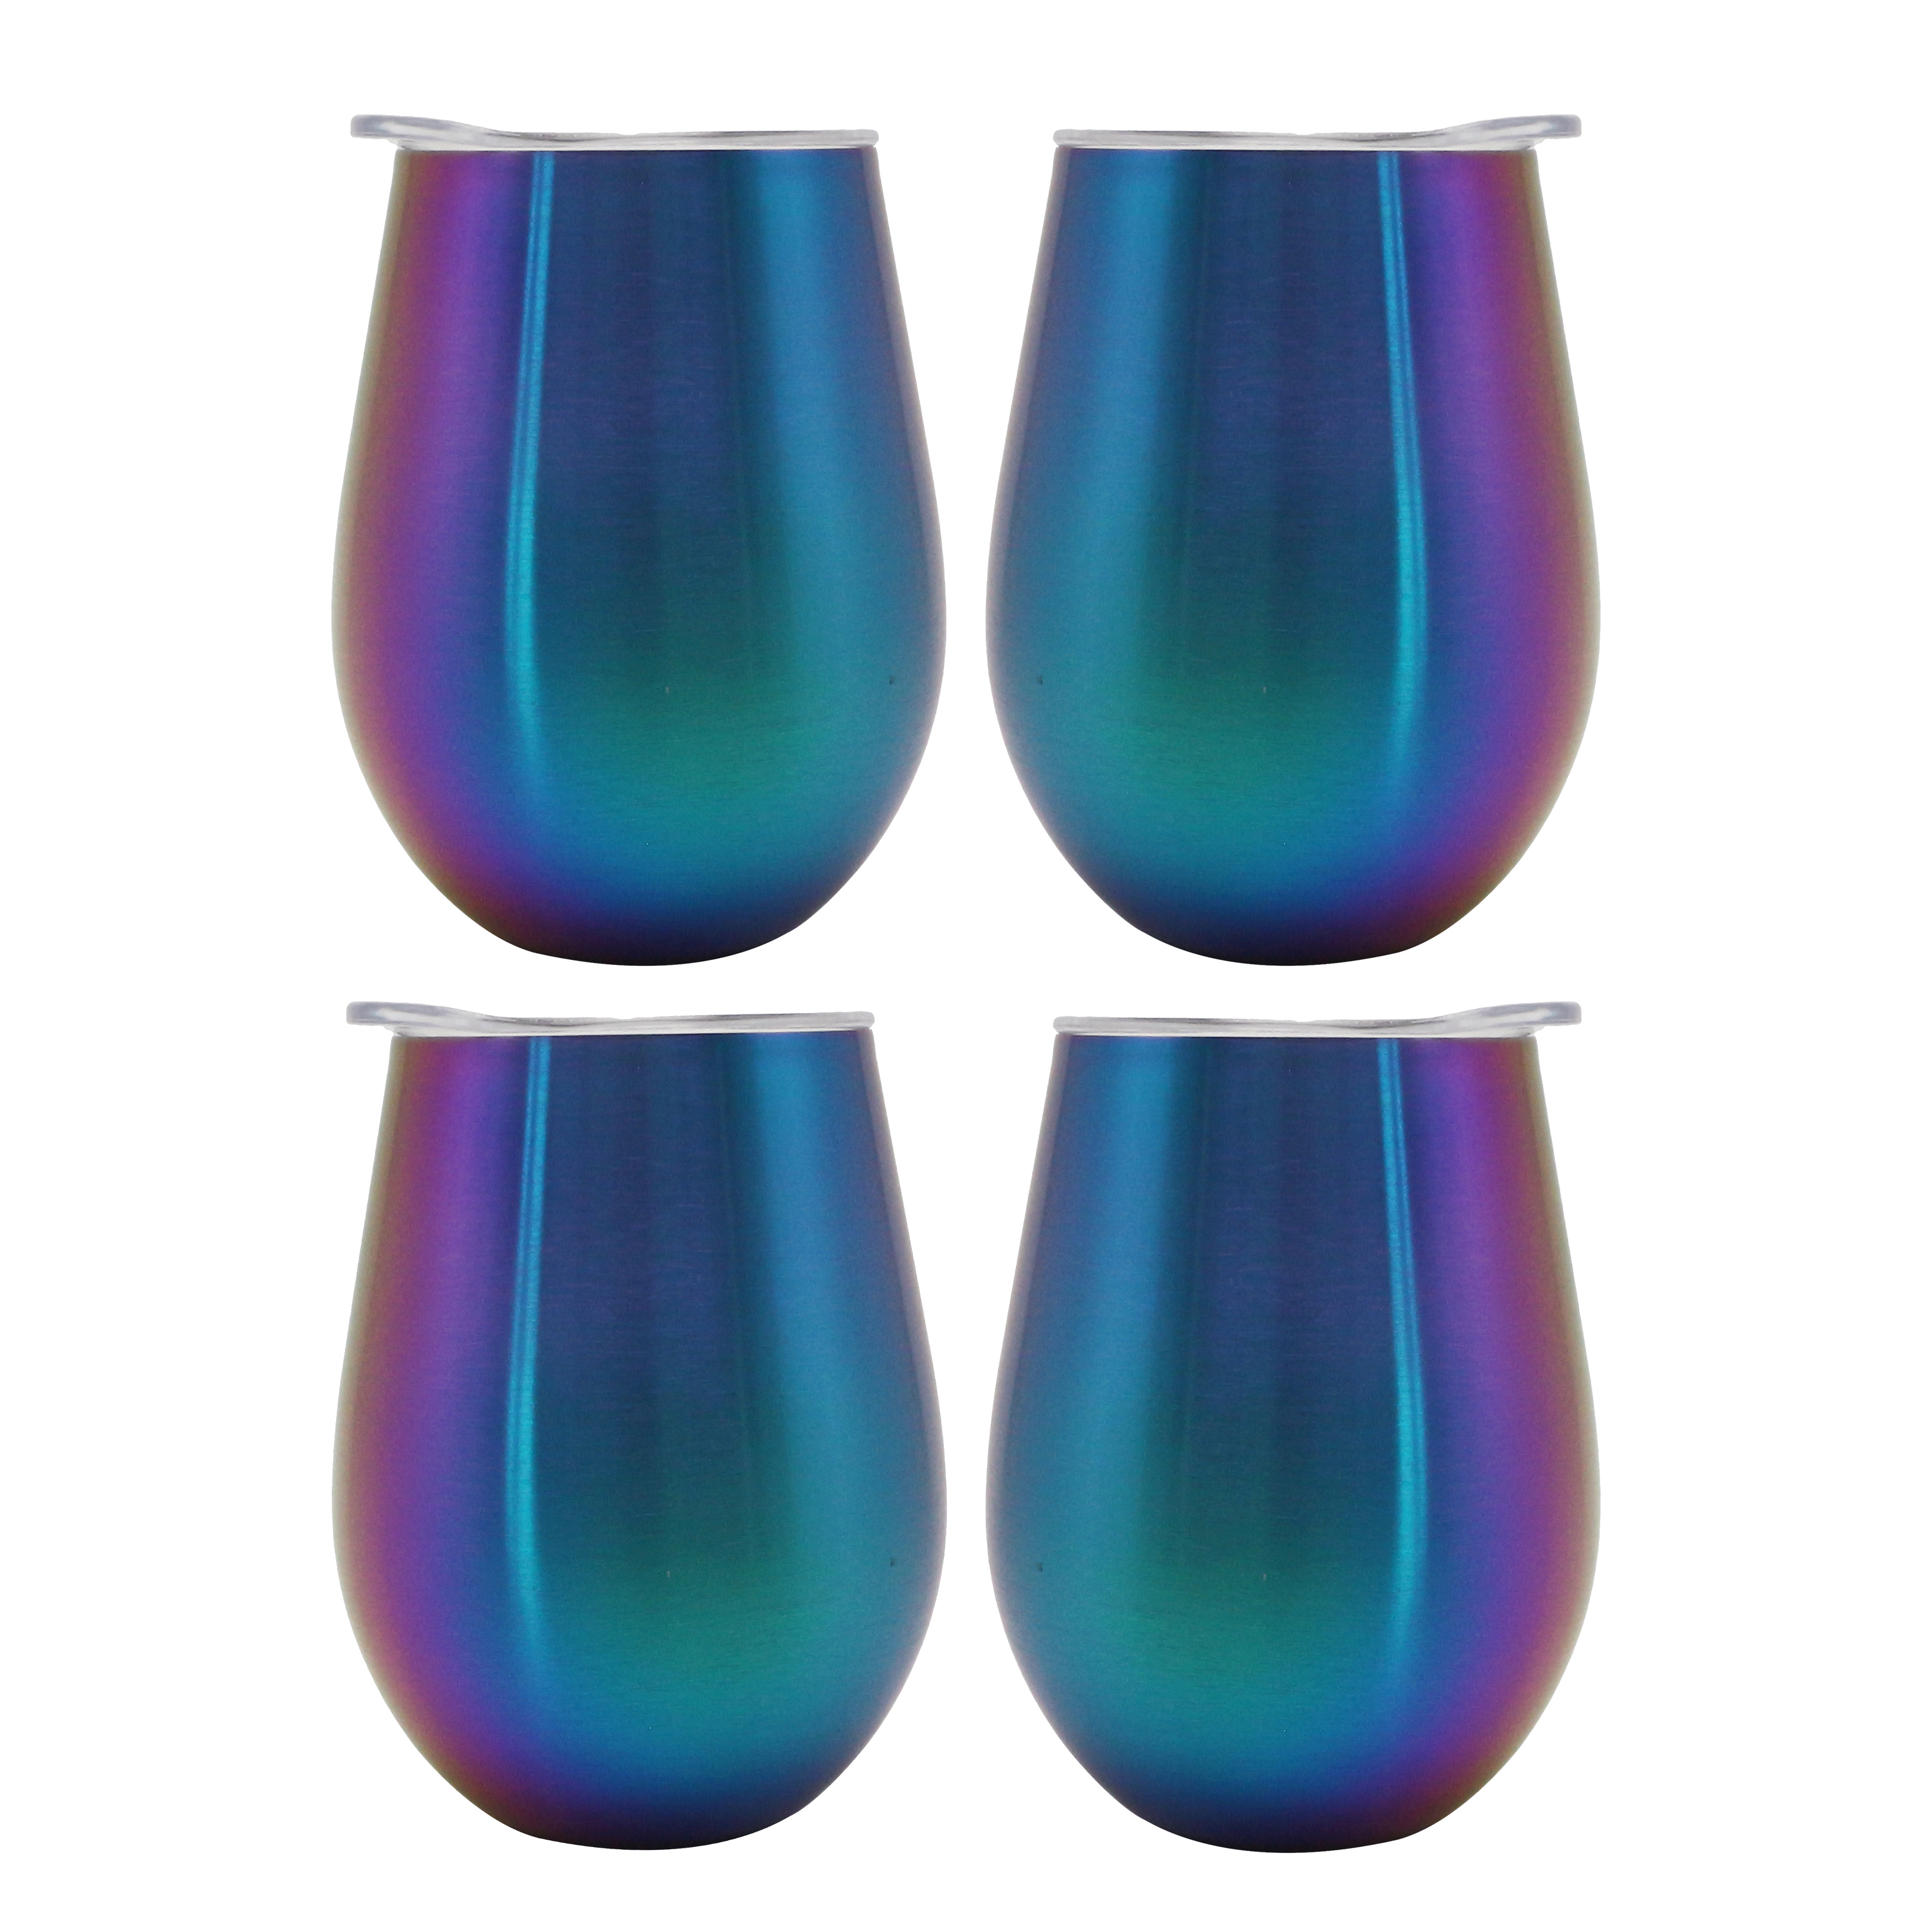 Mainstays Double Wall Stainless Steel 10 oz. Rainbow Wine Tumblers, 4 Pack - image 1 of 6